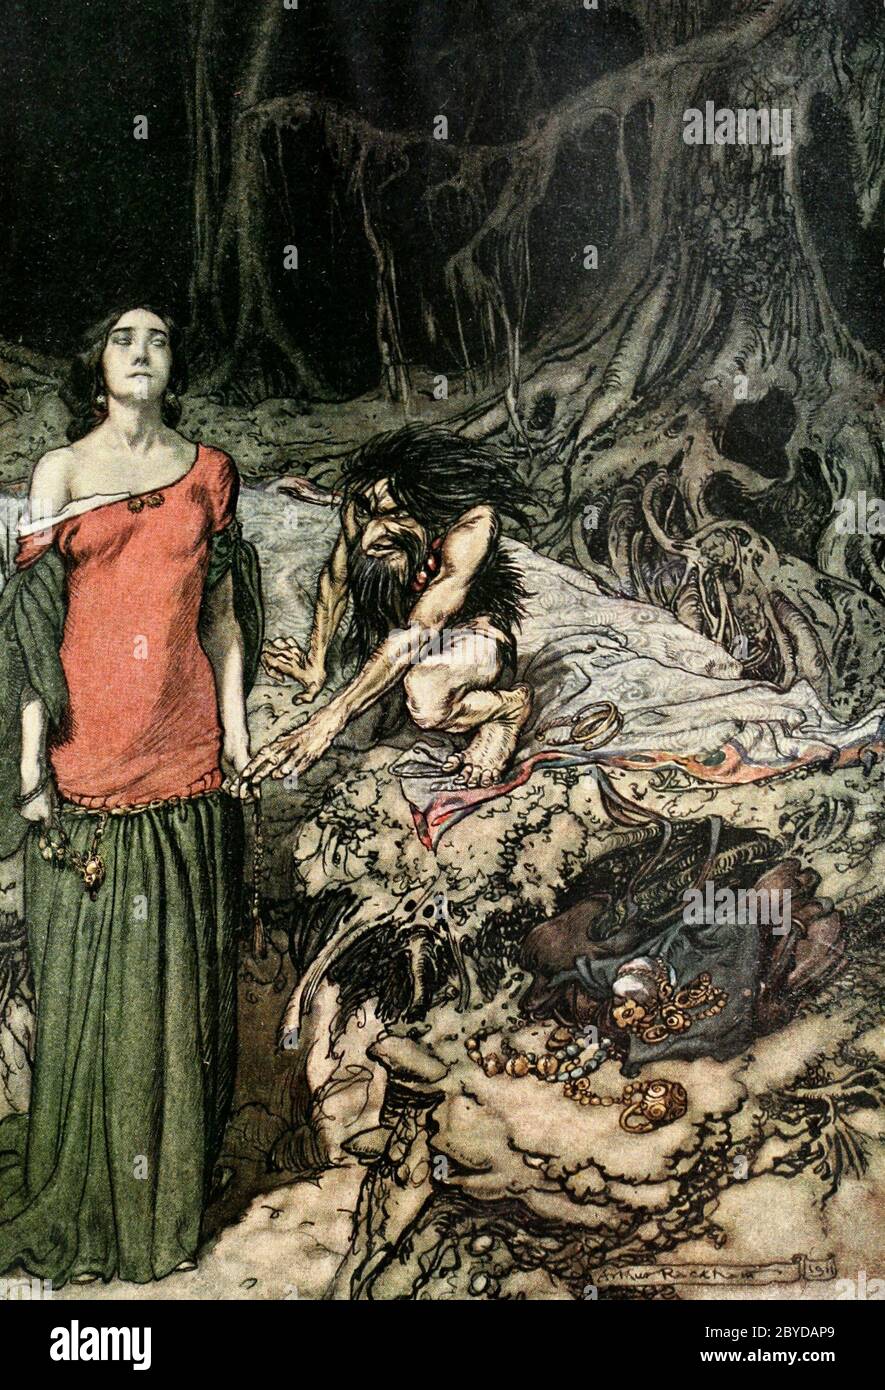 The wooing of Grimhilde, the mother of Hagen from the Twilight of the Gods - Arthur Rackham, 1911 Stock Photo